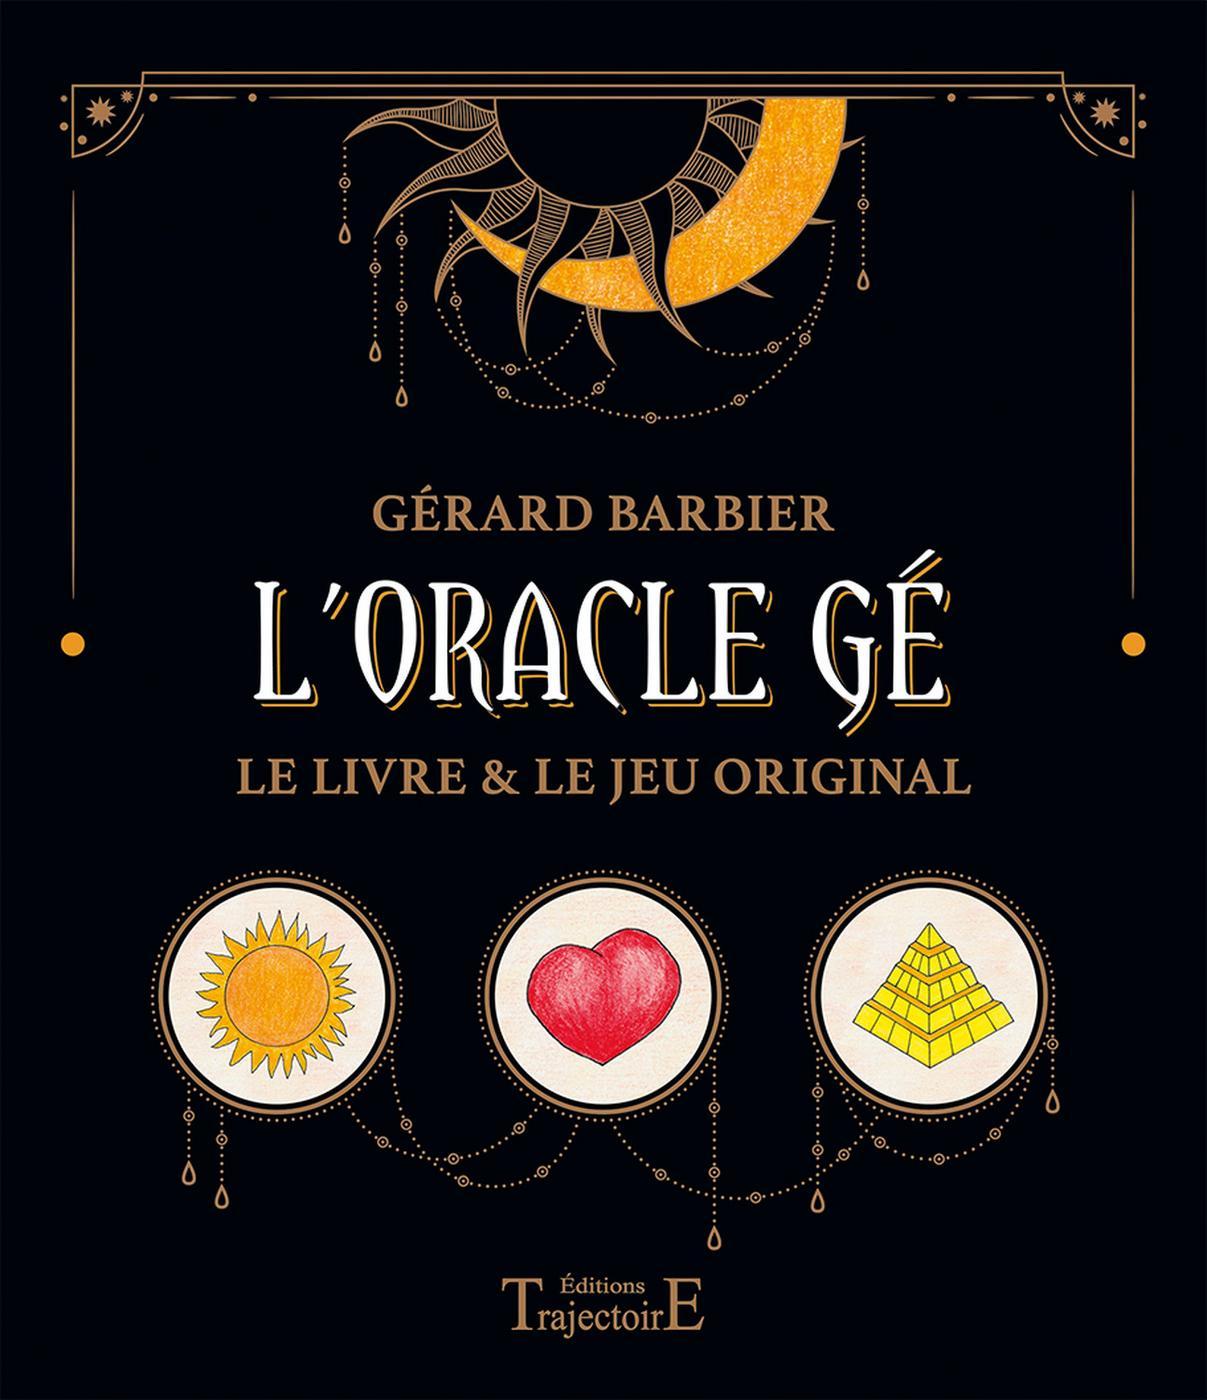 Coffret luxe or Oracle Gé